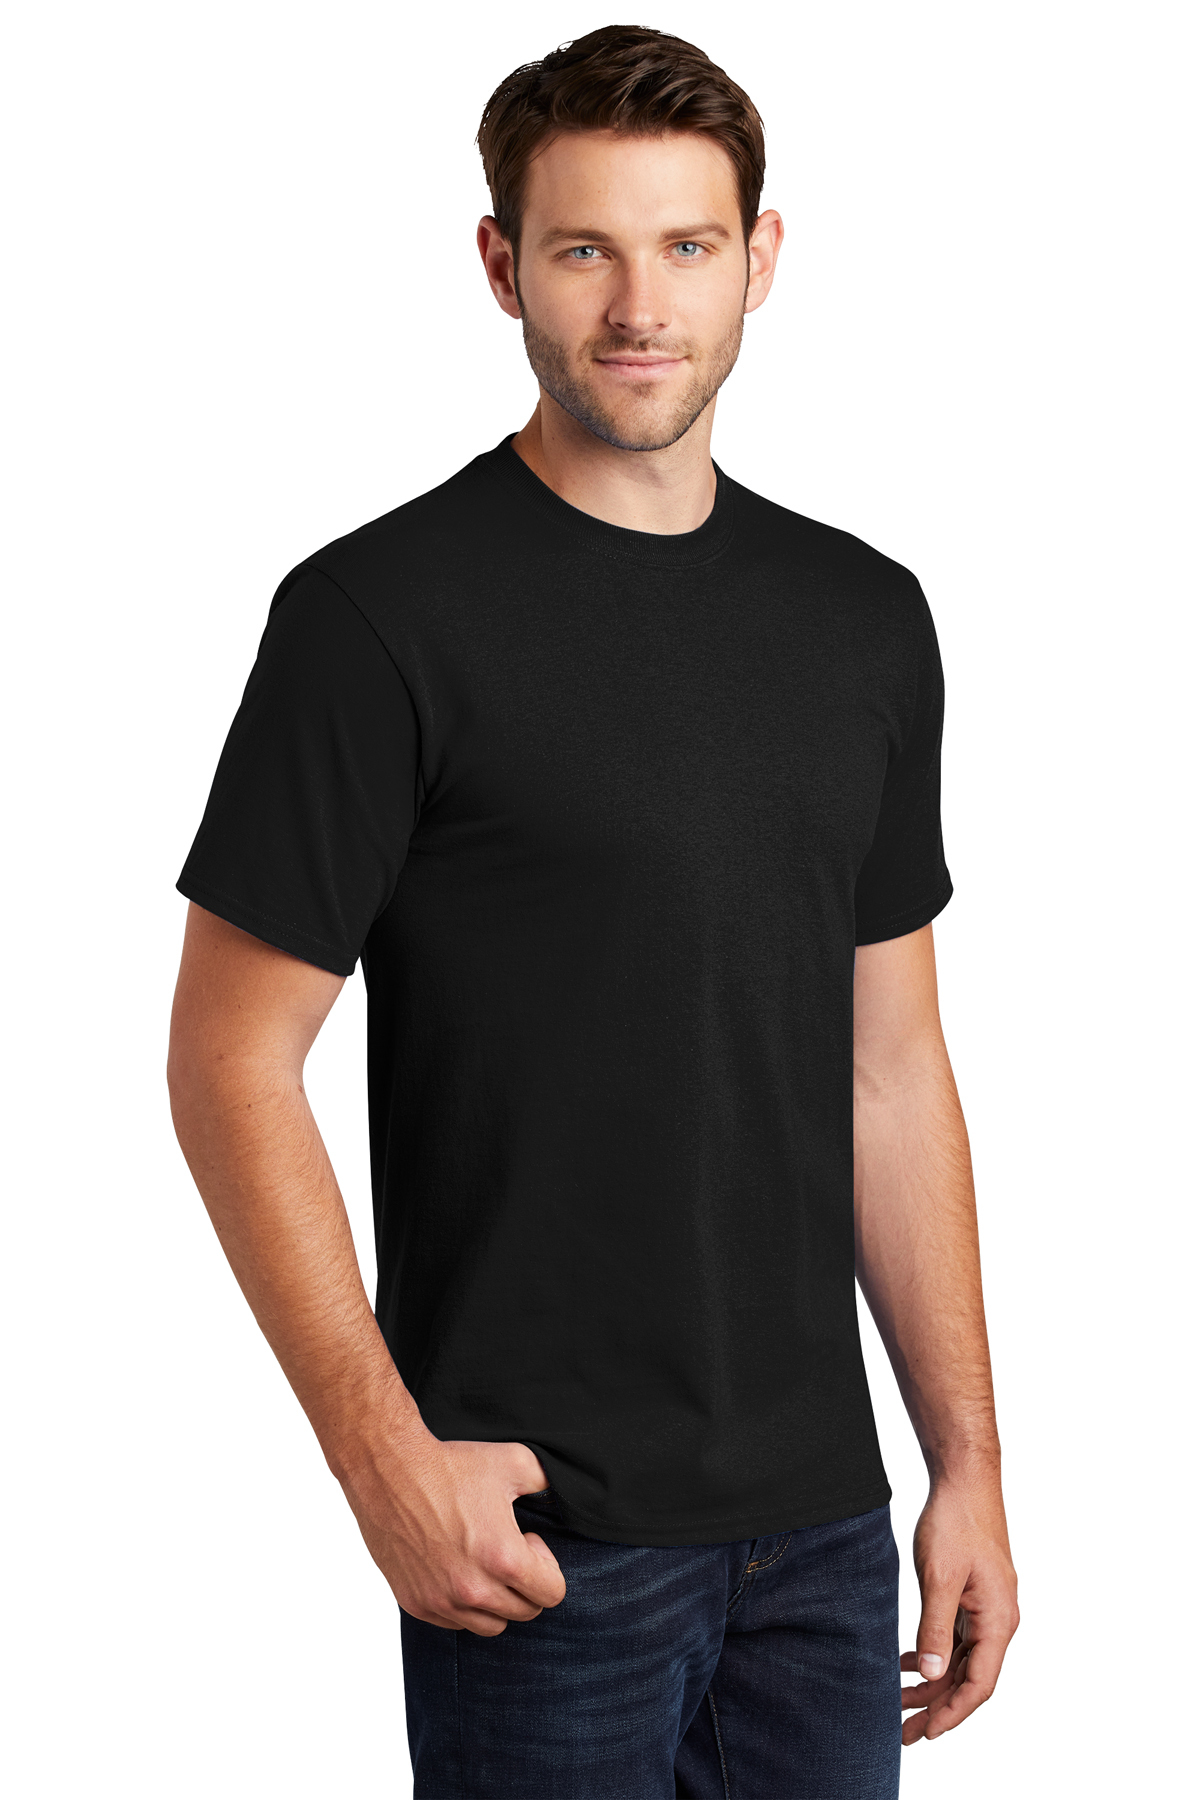 Port & Company Tall Essential Tee | Product | Port & Company